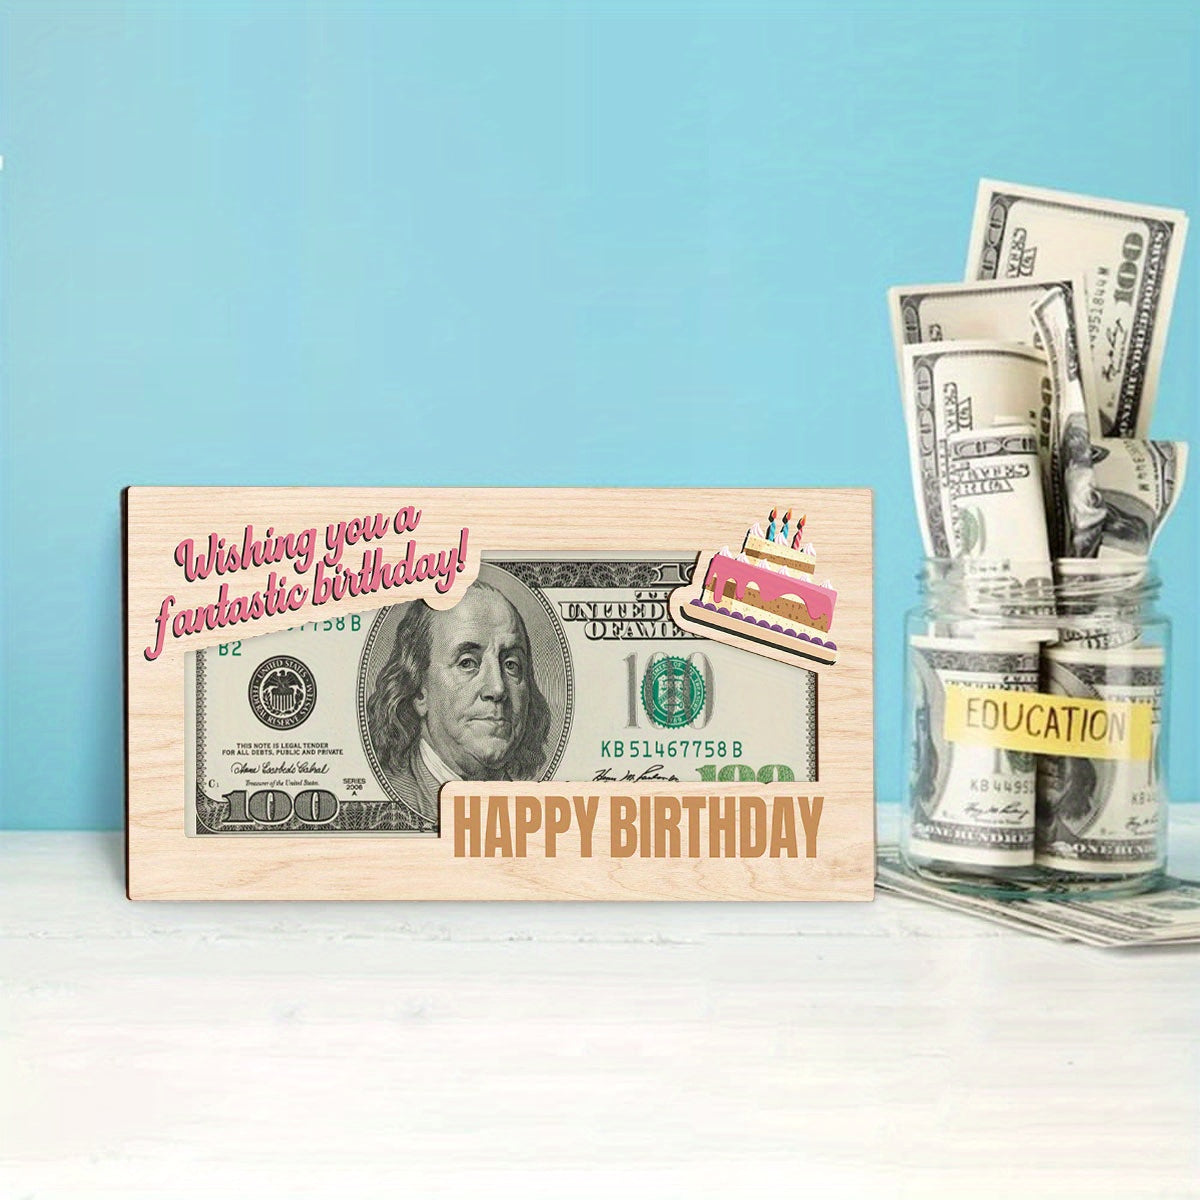 1pc, Wooden Money Holder, Personalized Birthday Gift (11.8''x5.9''), Cash Surprise Box, Festive Decoration, With Celebration Phrases For Home & Party Decor, Mother's Day Spring Easter Gift-T